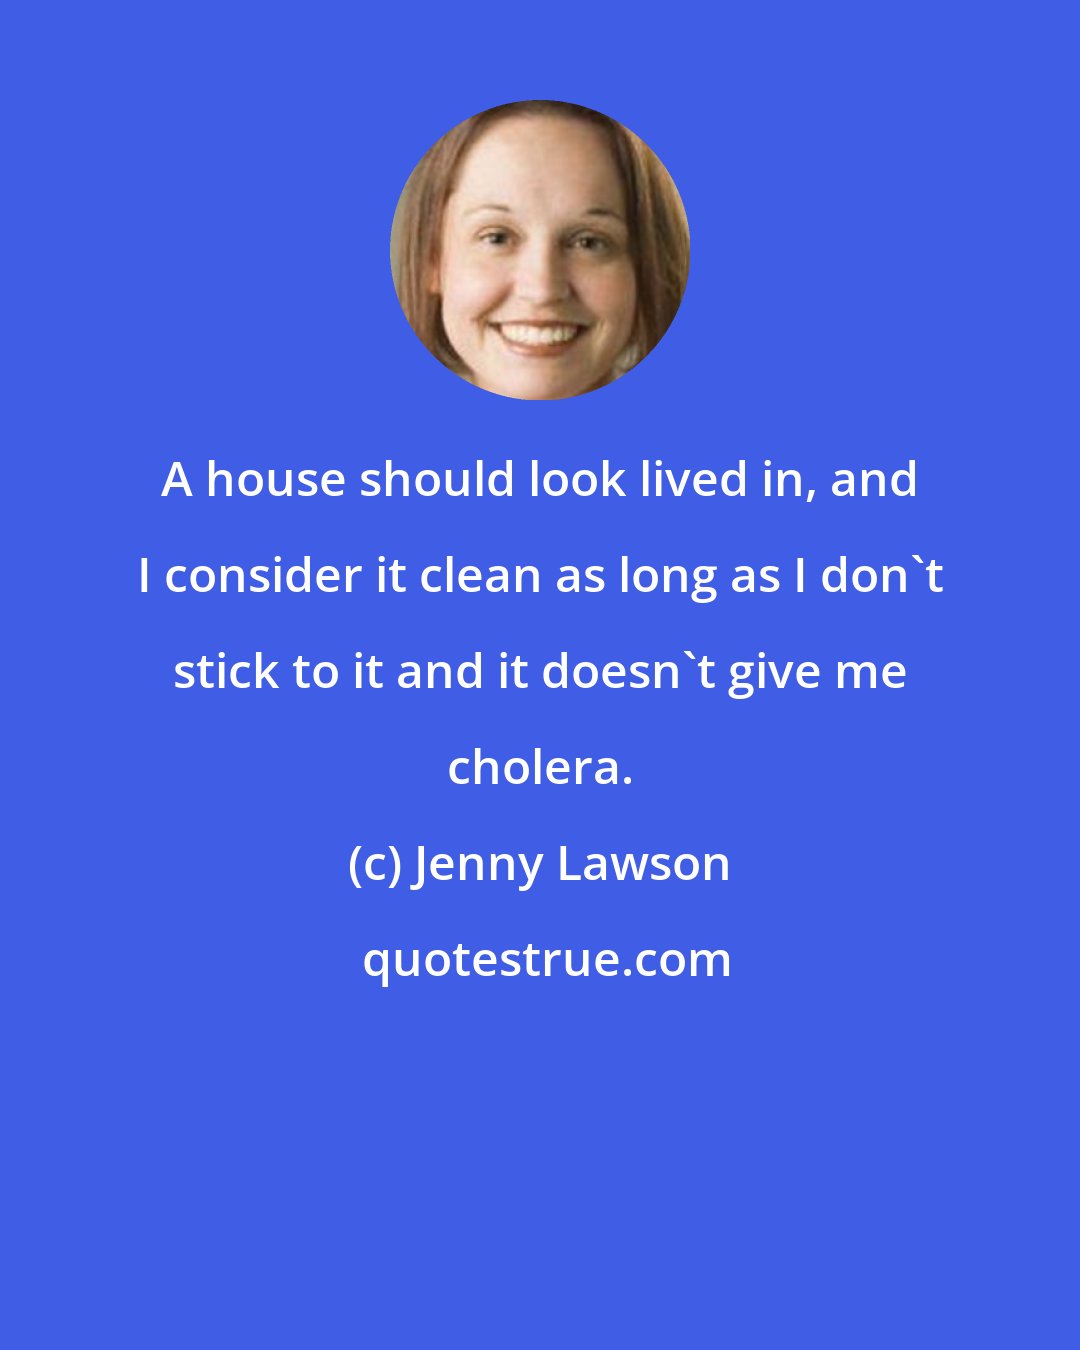 Jenny Lawson: A house should look lived in, and I consider it clean as long as I don't stick to it and it doesn't give me cholera.